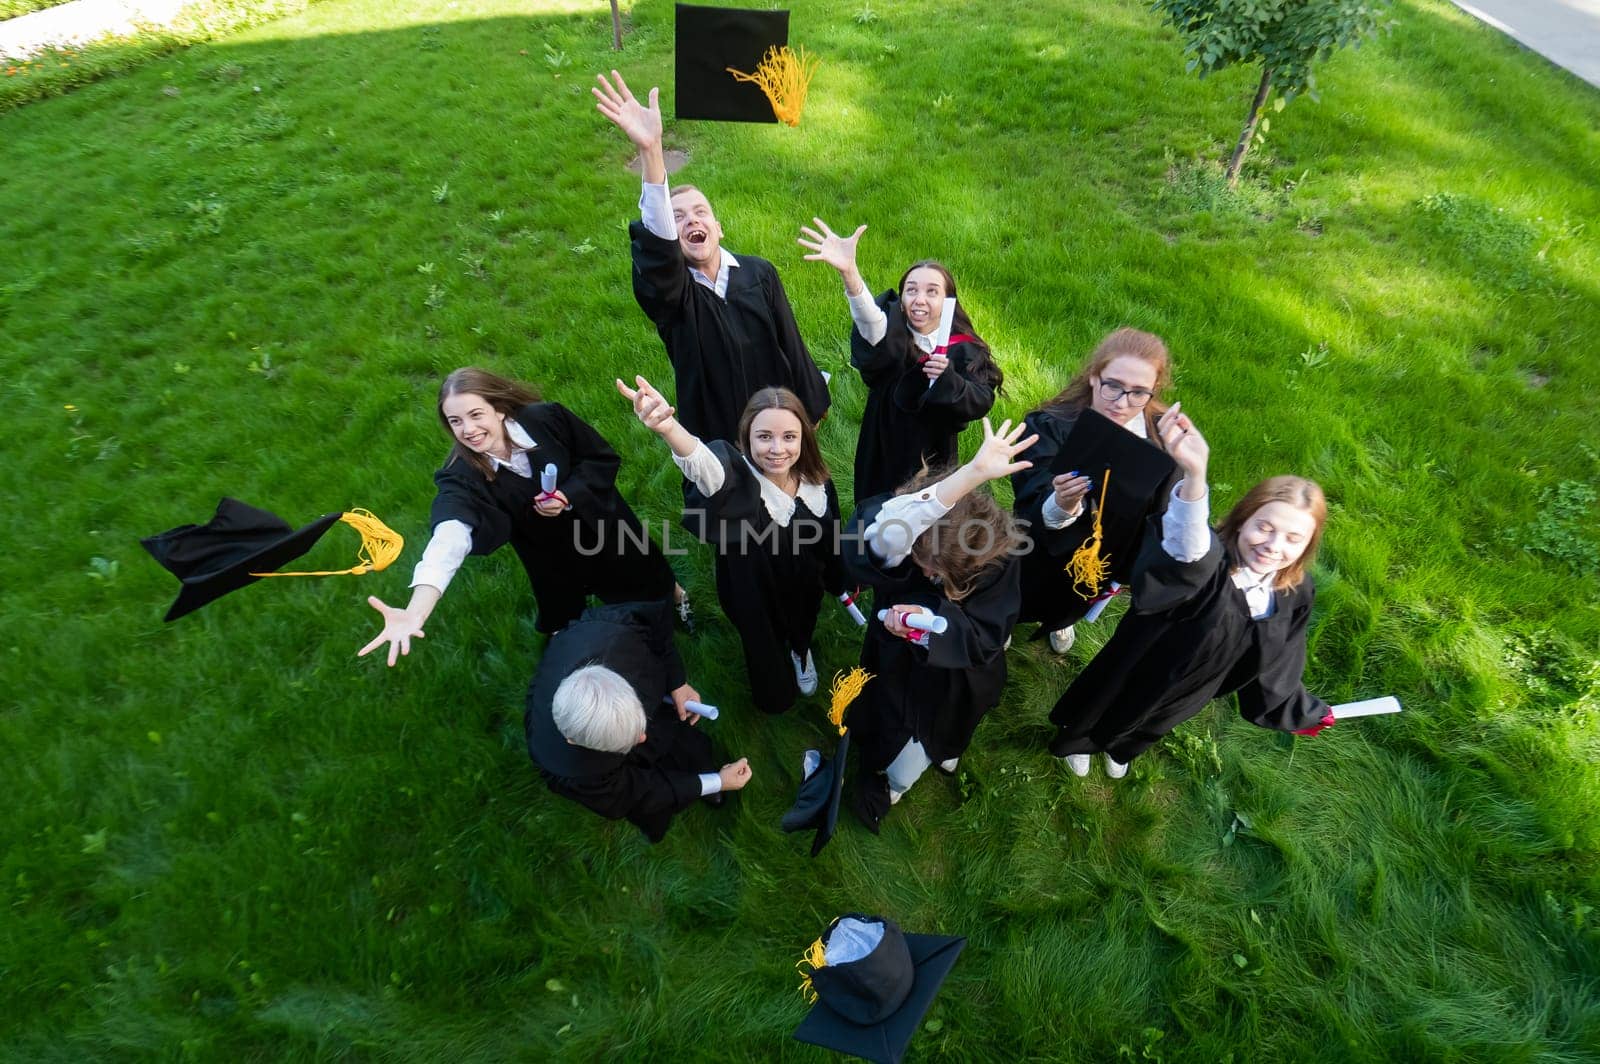 Classmates in graduation gowns throw their caps. View from above